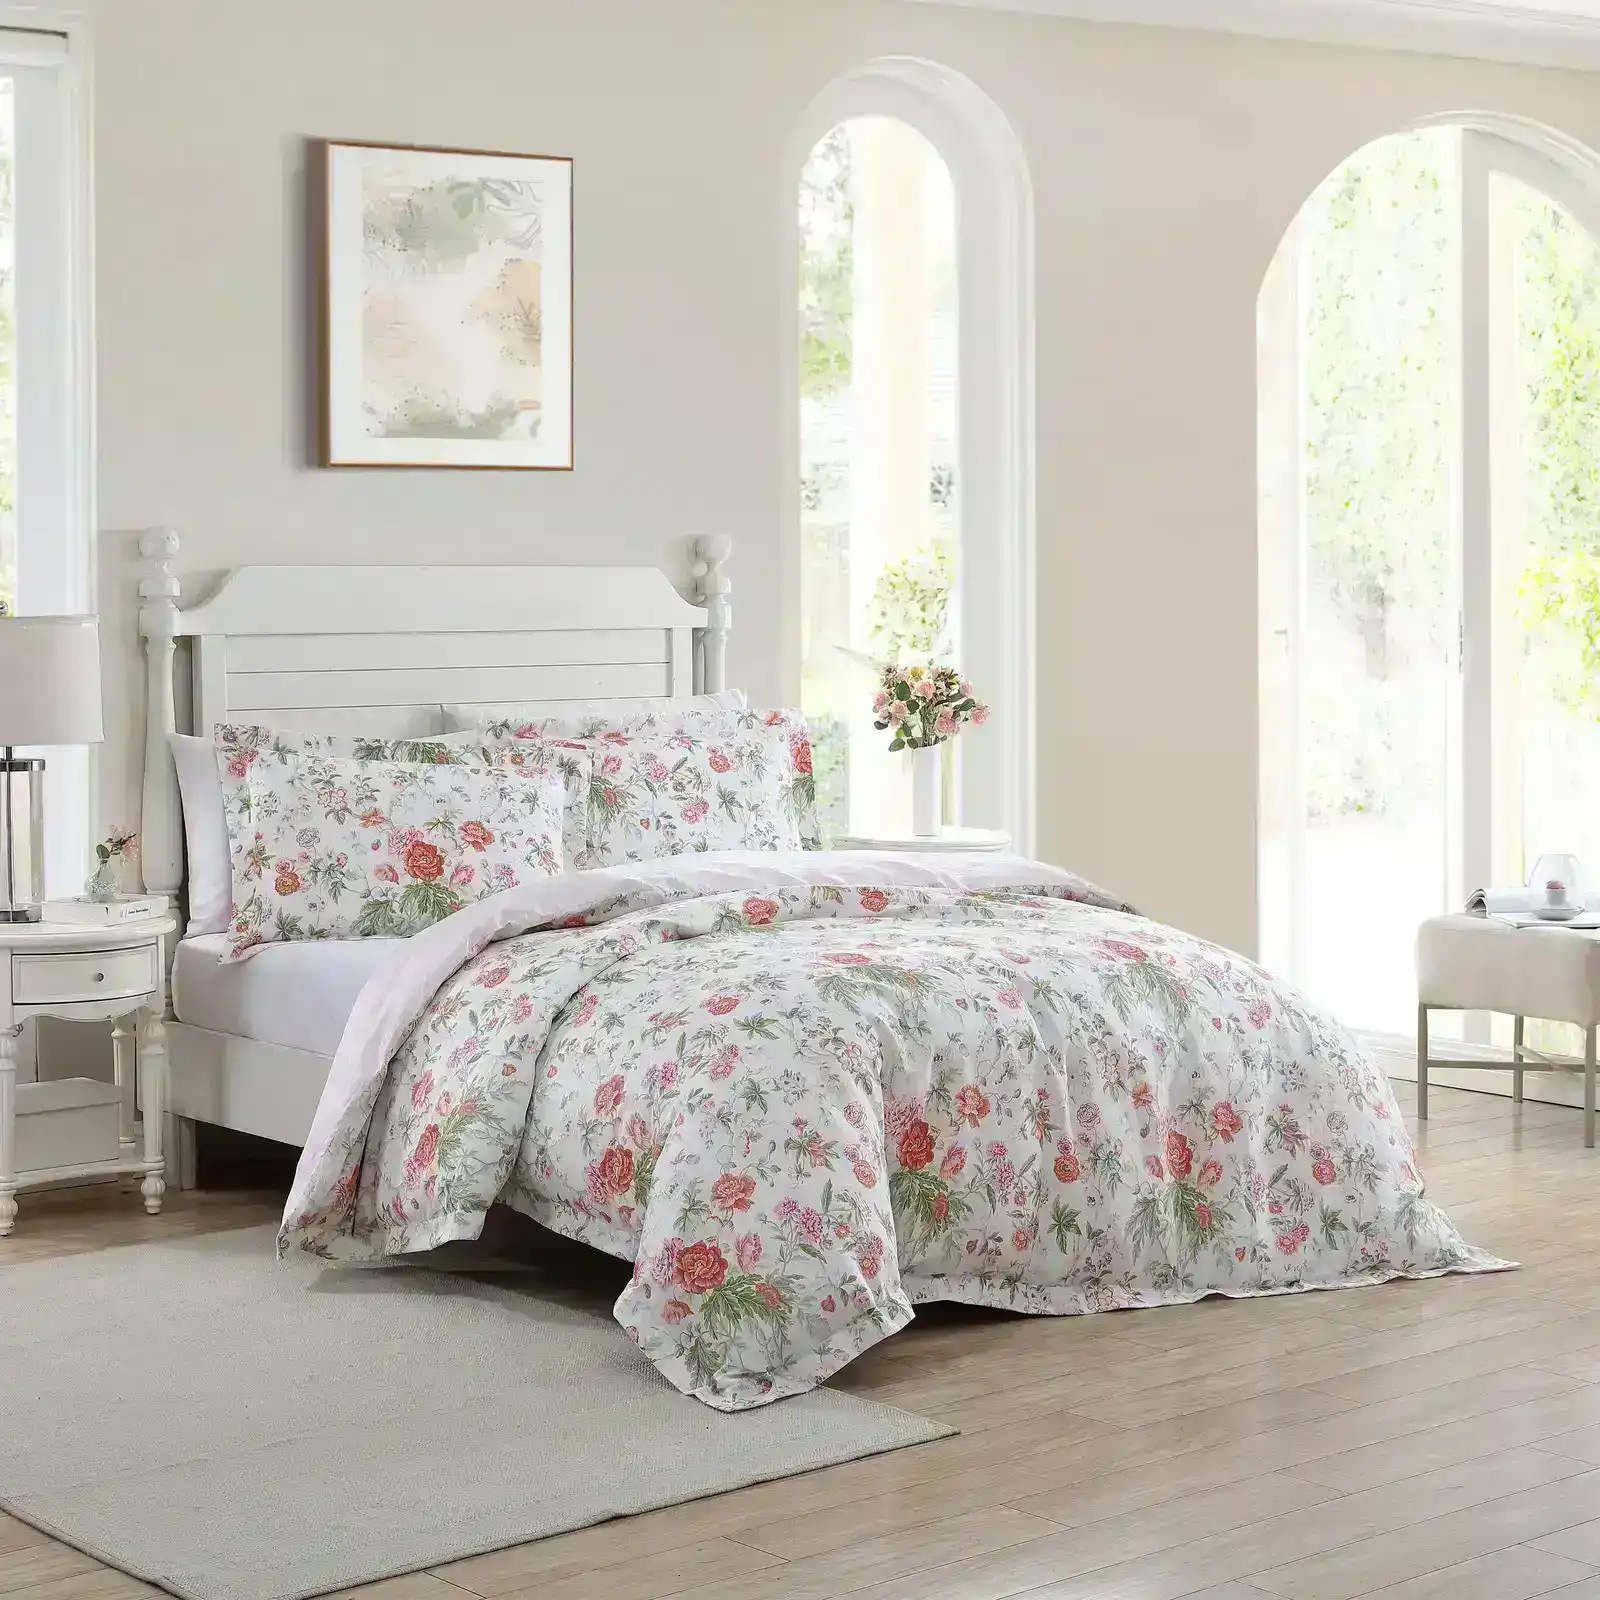 Laura Ashley Super King Bed Breezy Floral Quilt Cover w/2x Pillowcases Set Coral